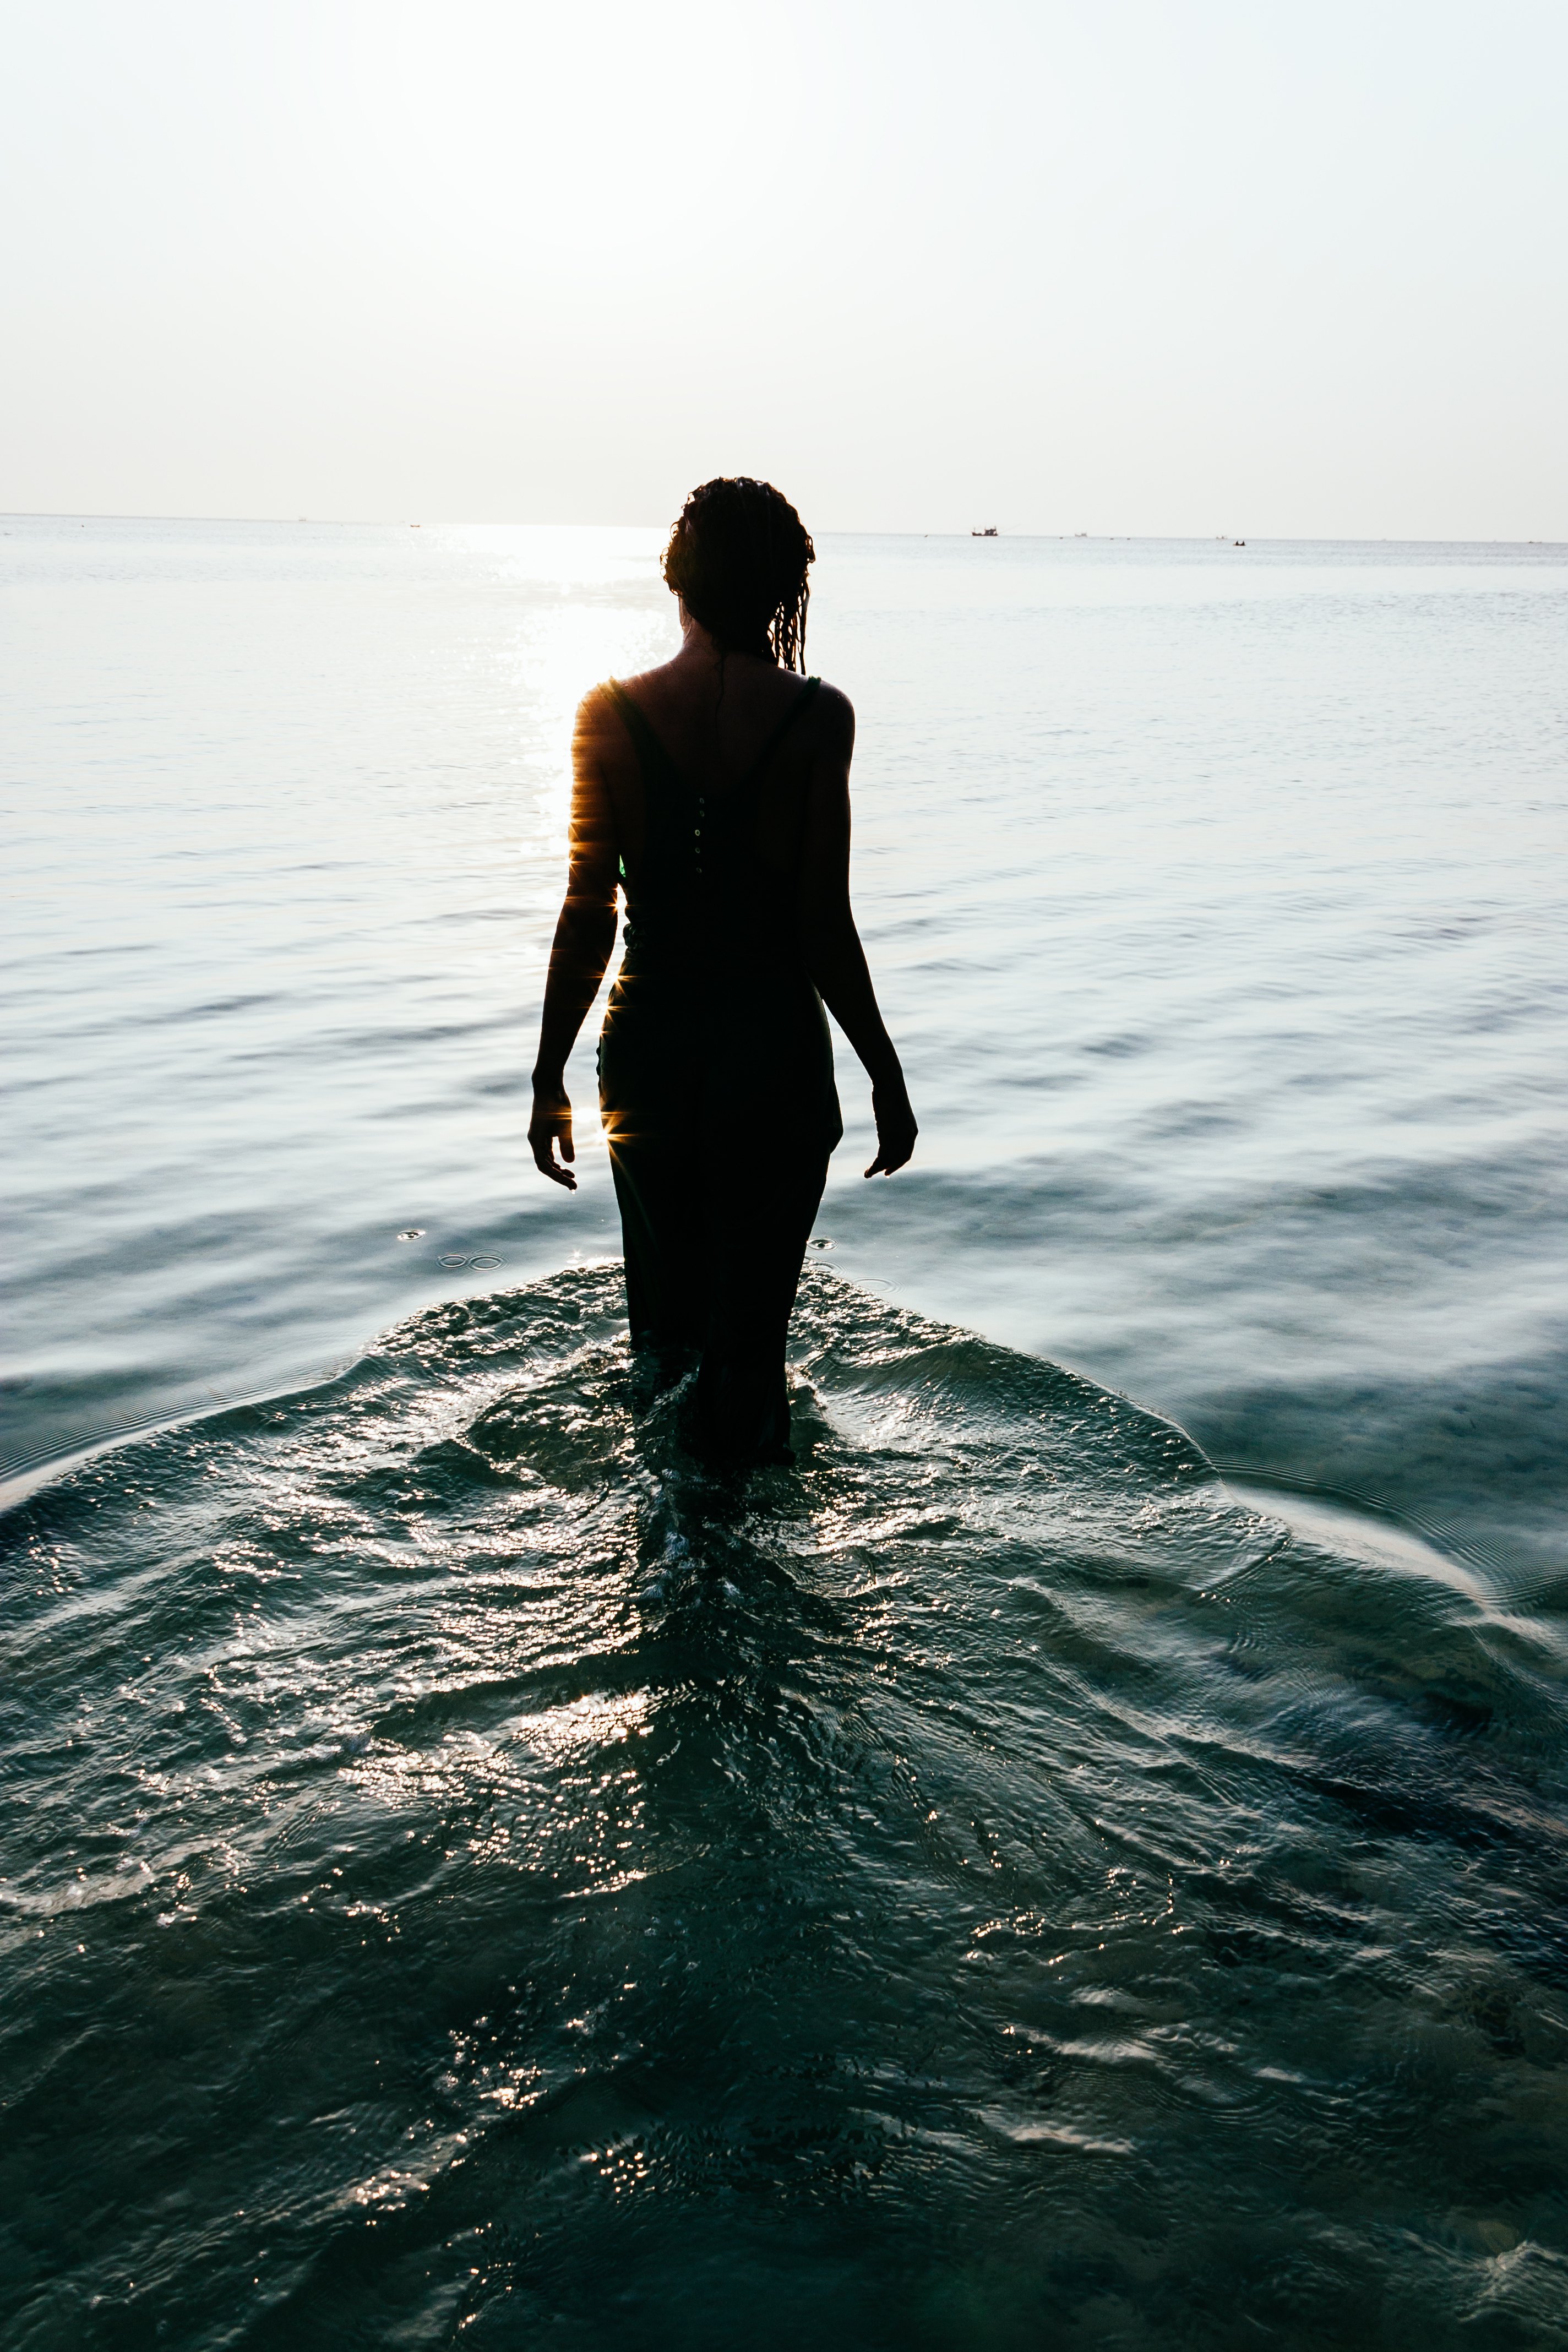 Tranquil scene with a view from behind of the silhouette of a wet young woman standing in the ocean facing out in meditation as the water flows around her legs creating a rippling pattern